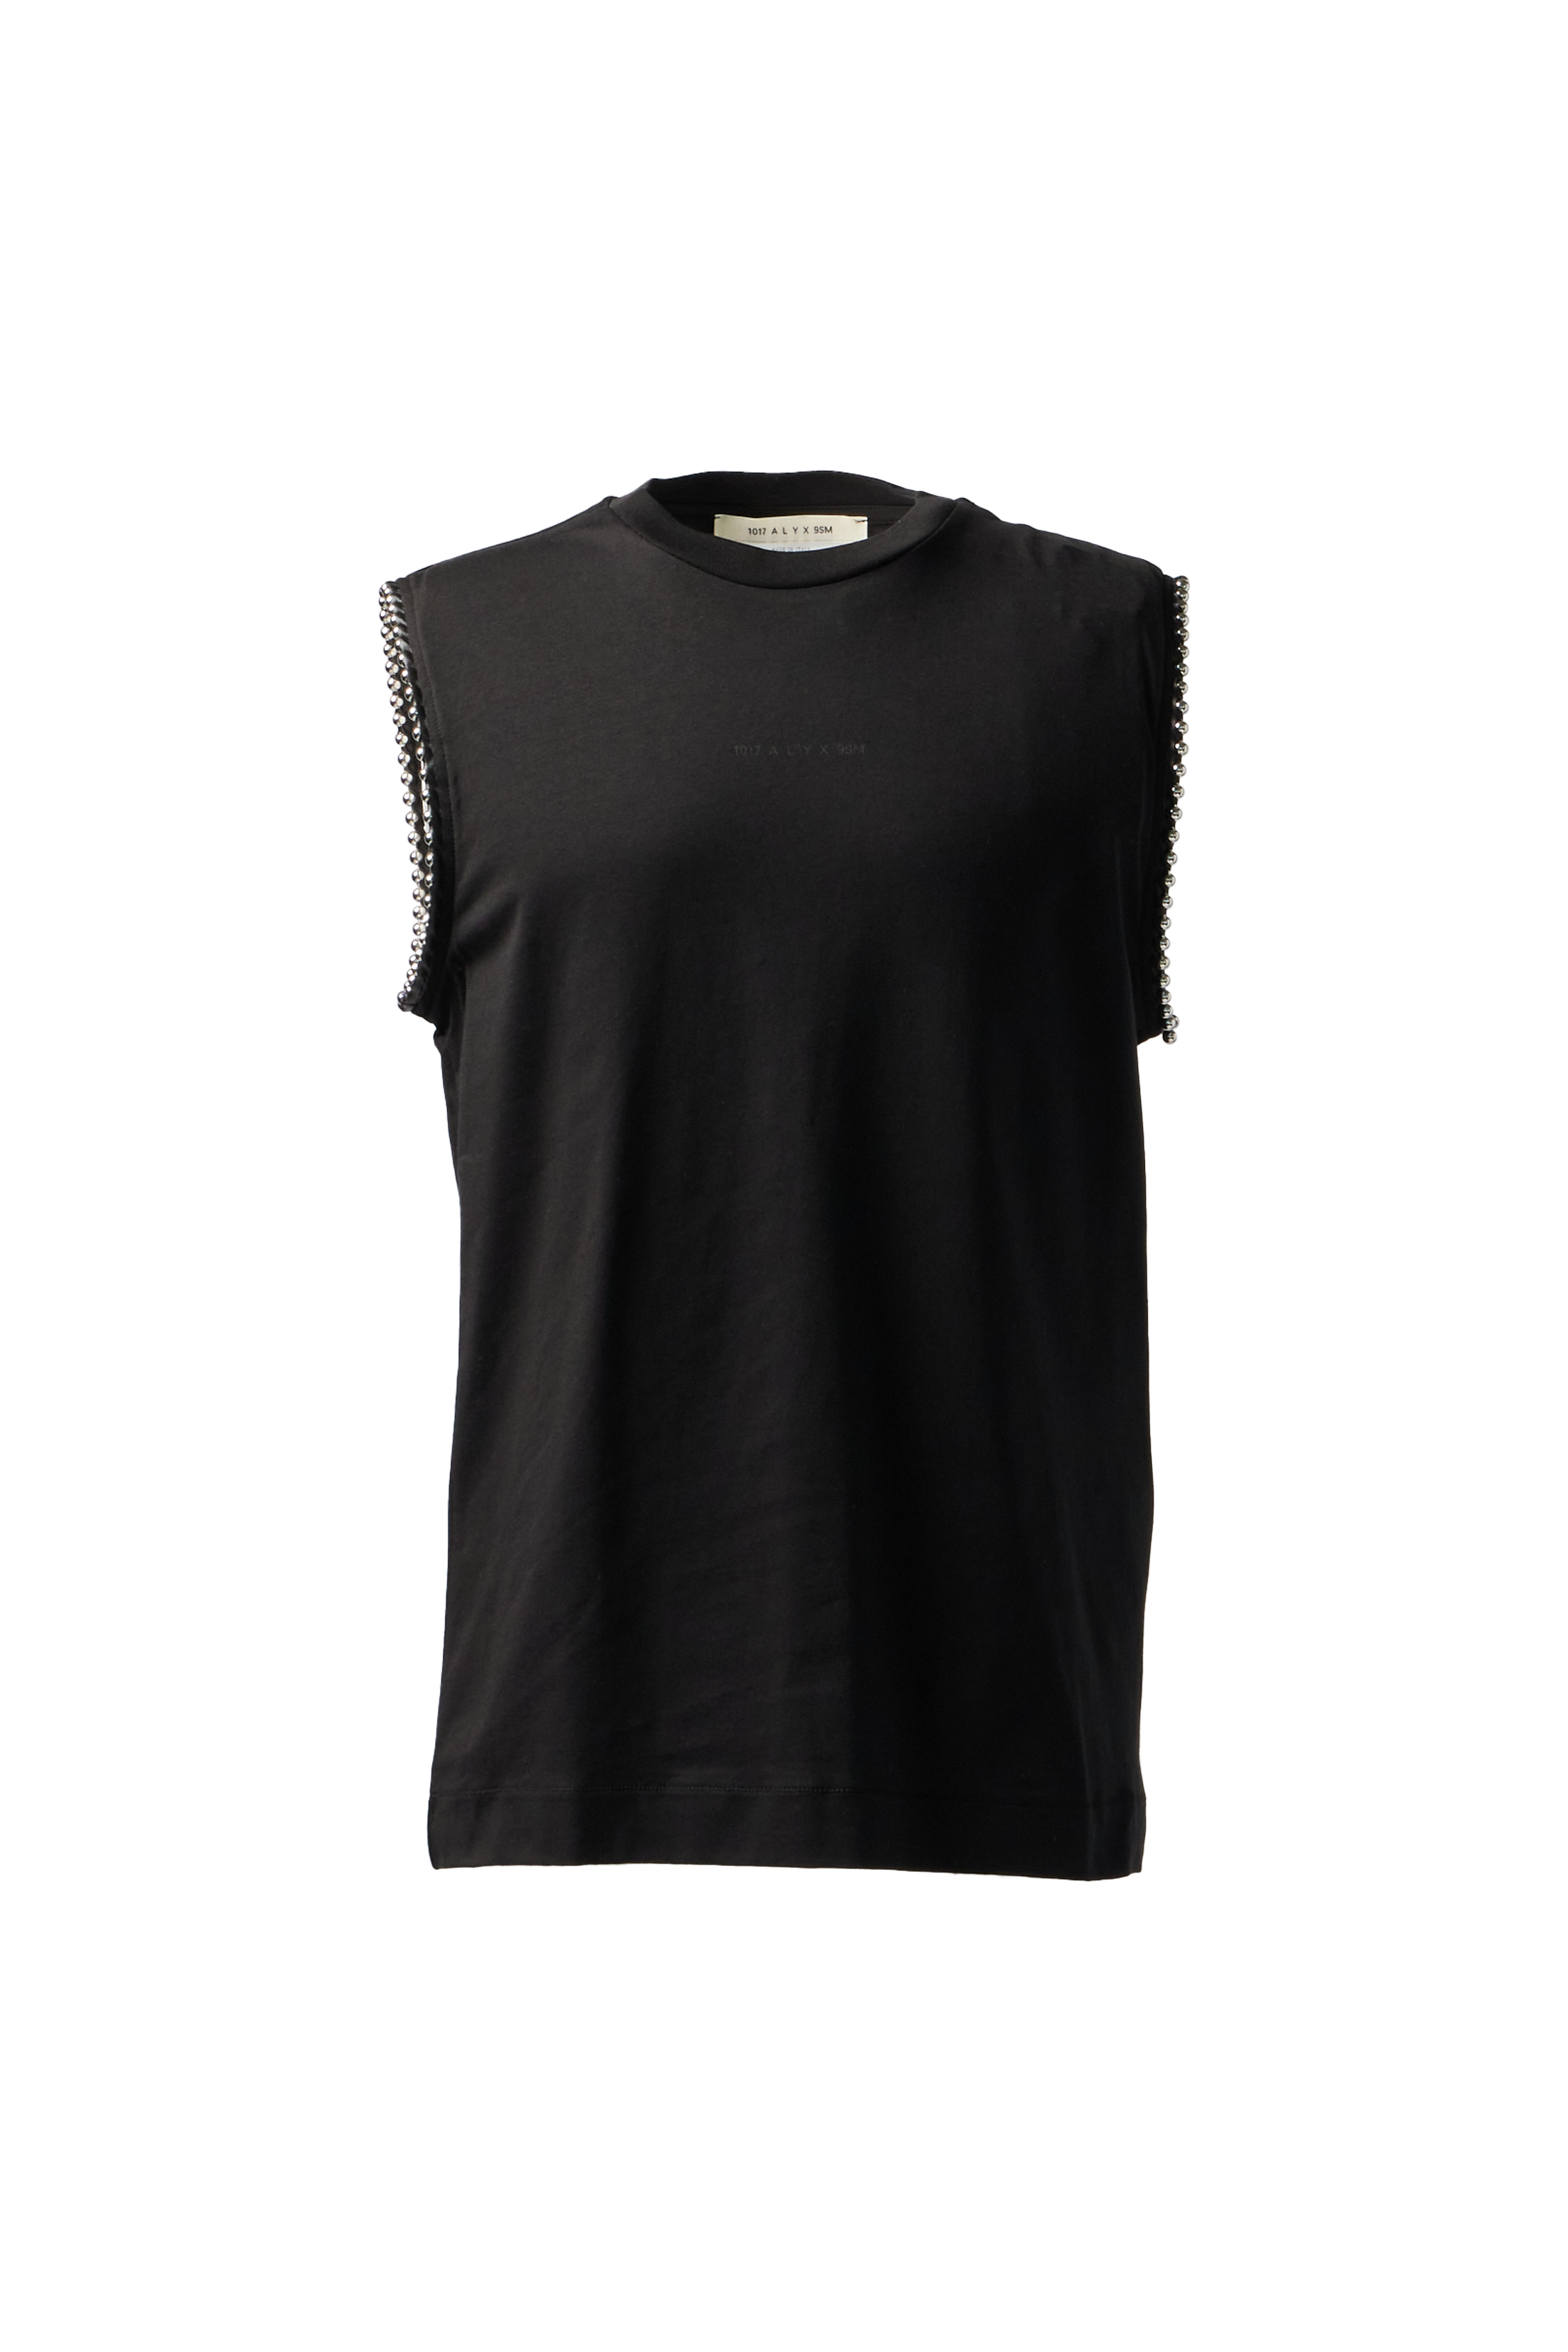 1017 ALYX 9SM - Ball Chain Tank Top product image